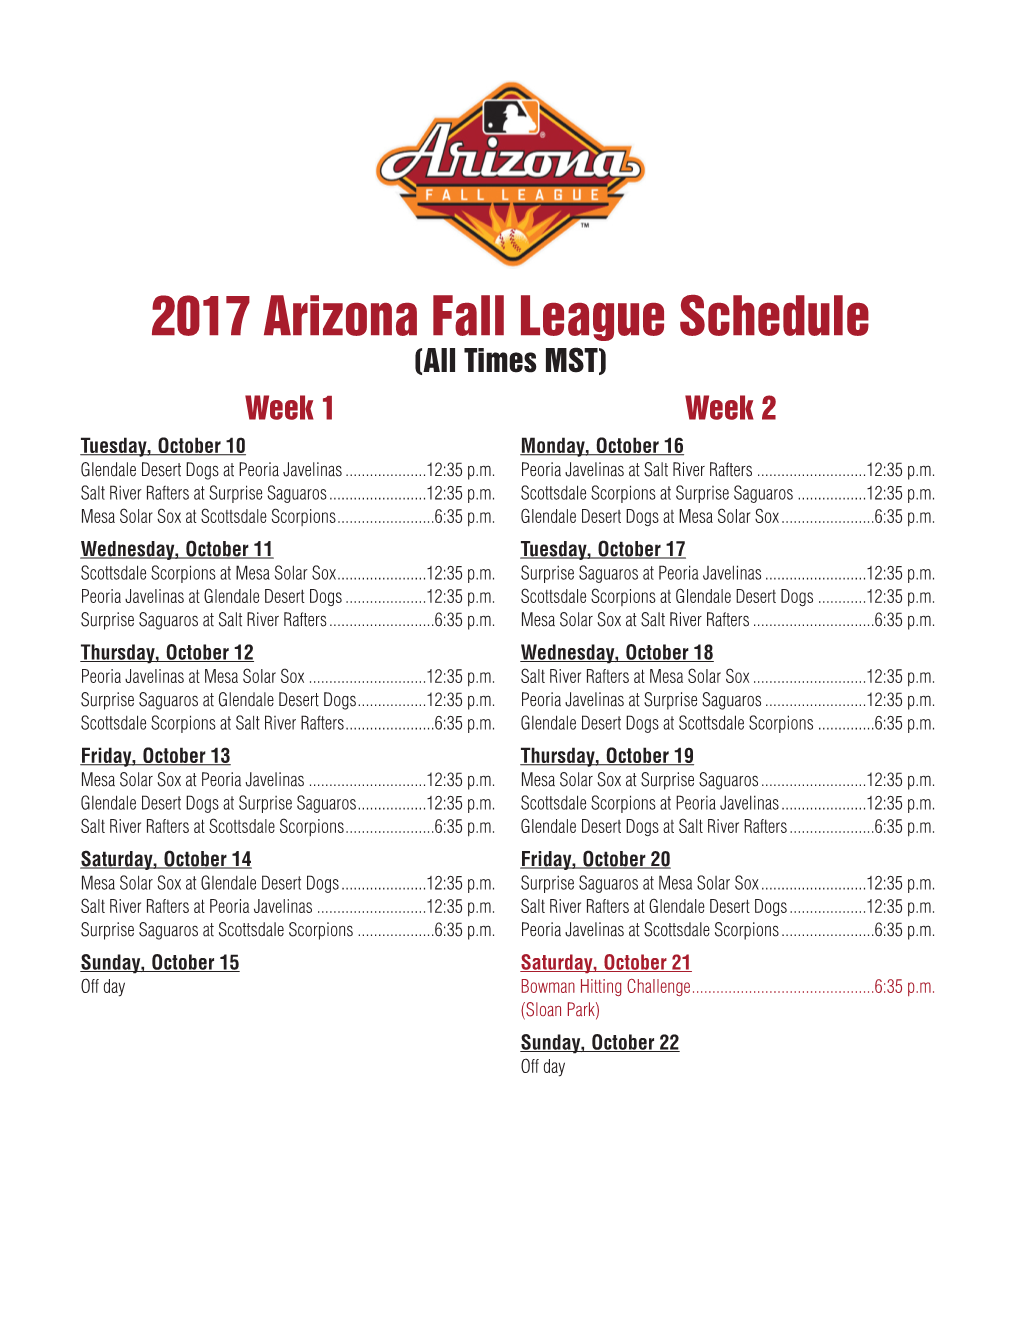 2017 Arizona Fall League Schedule (All Times MST) Week 1 Week 2 Tuesday, October 10 Monday, October 16 Glendale Desert Dogs at Peoria Javelinas